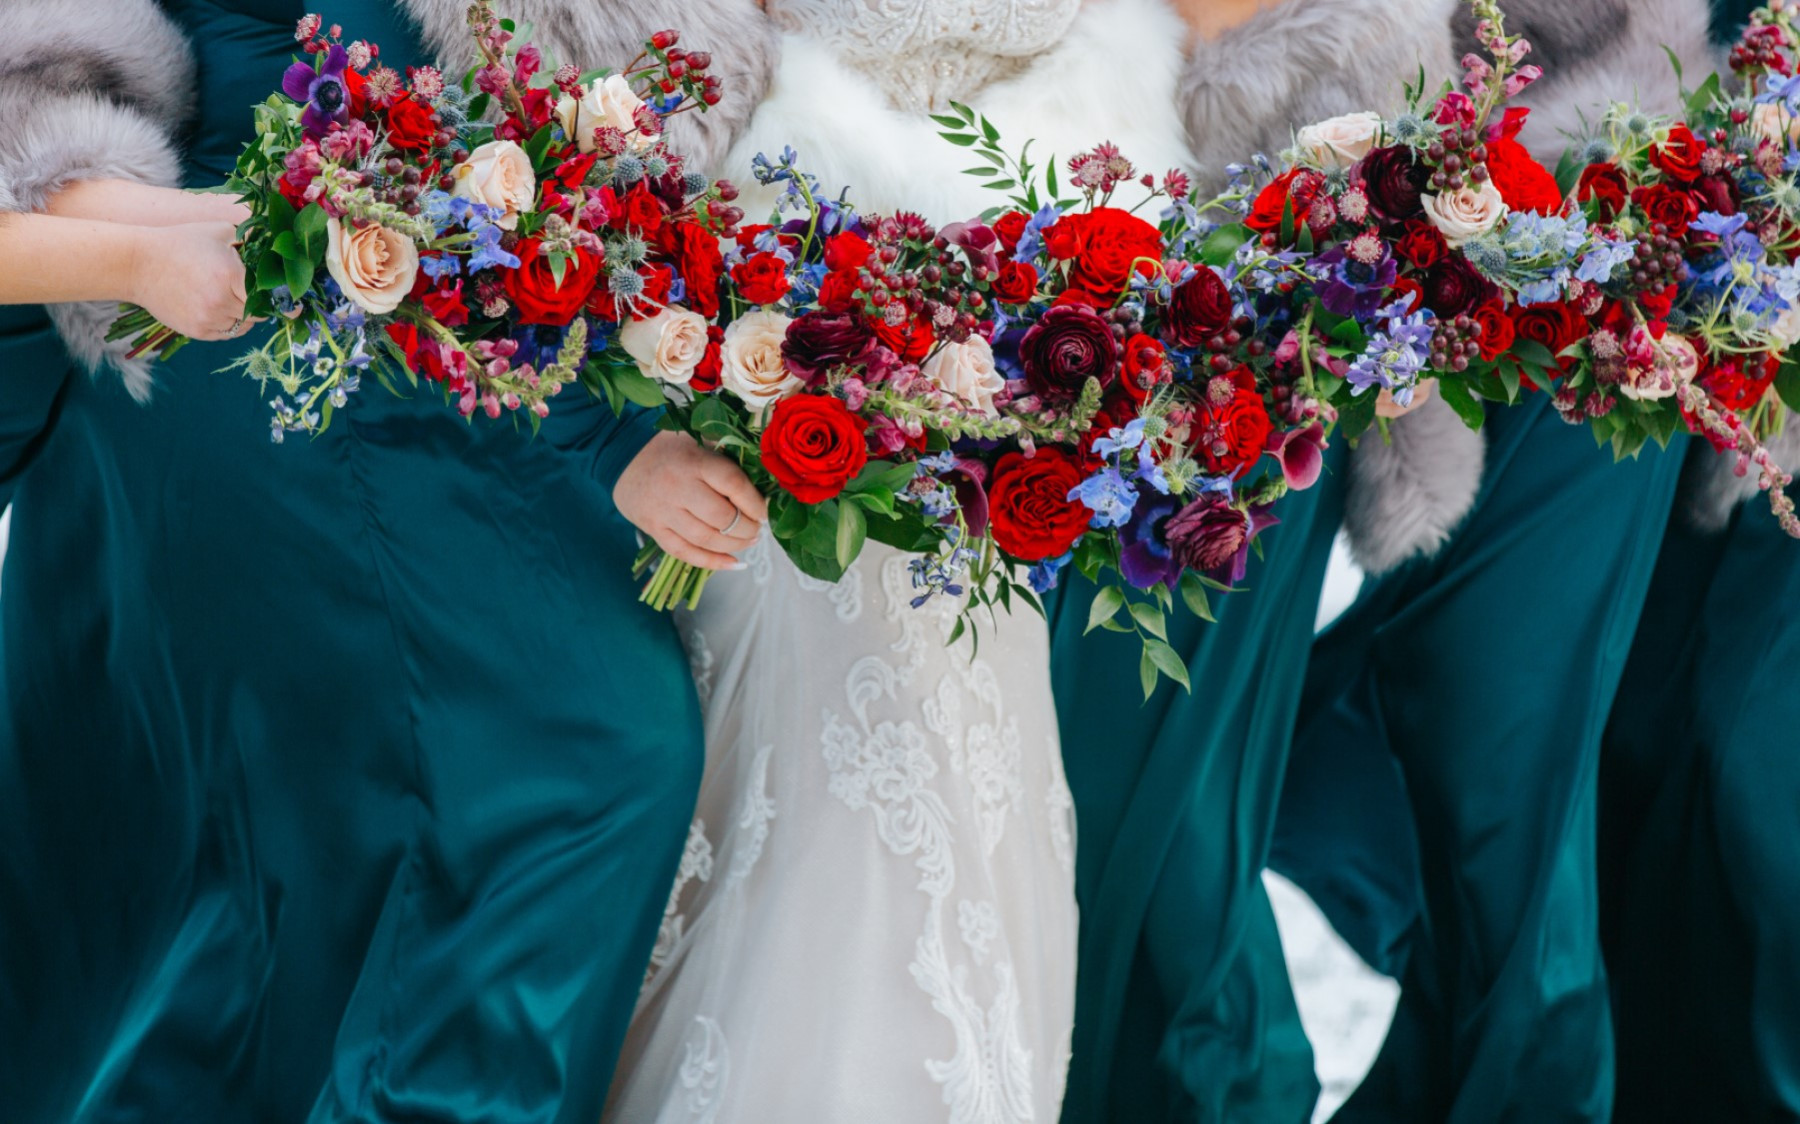 floral bouquets being held by bride and three other bridesmaids in teal. floral bouquets show red roses, pink, blue, and purple floral arrangements.